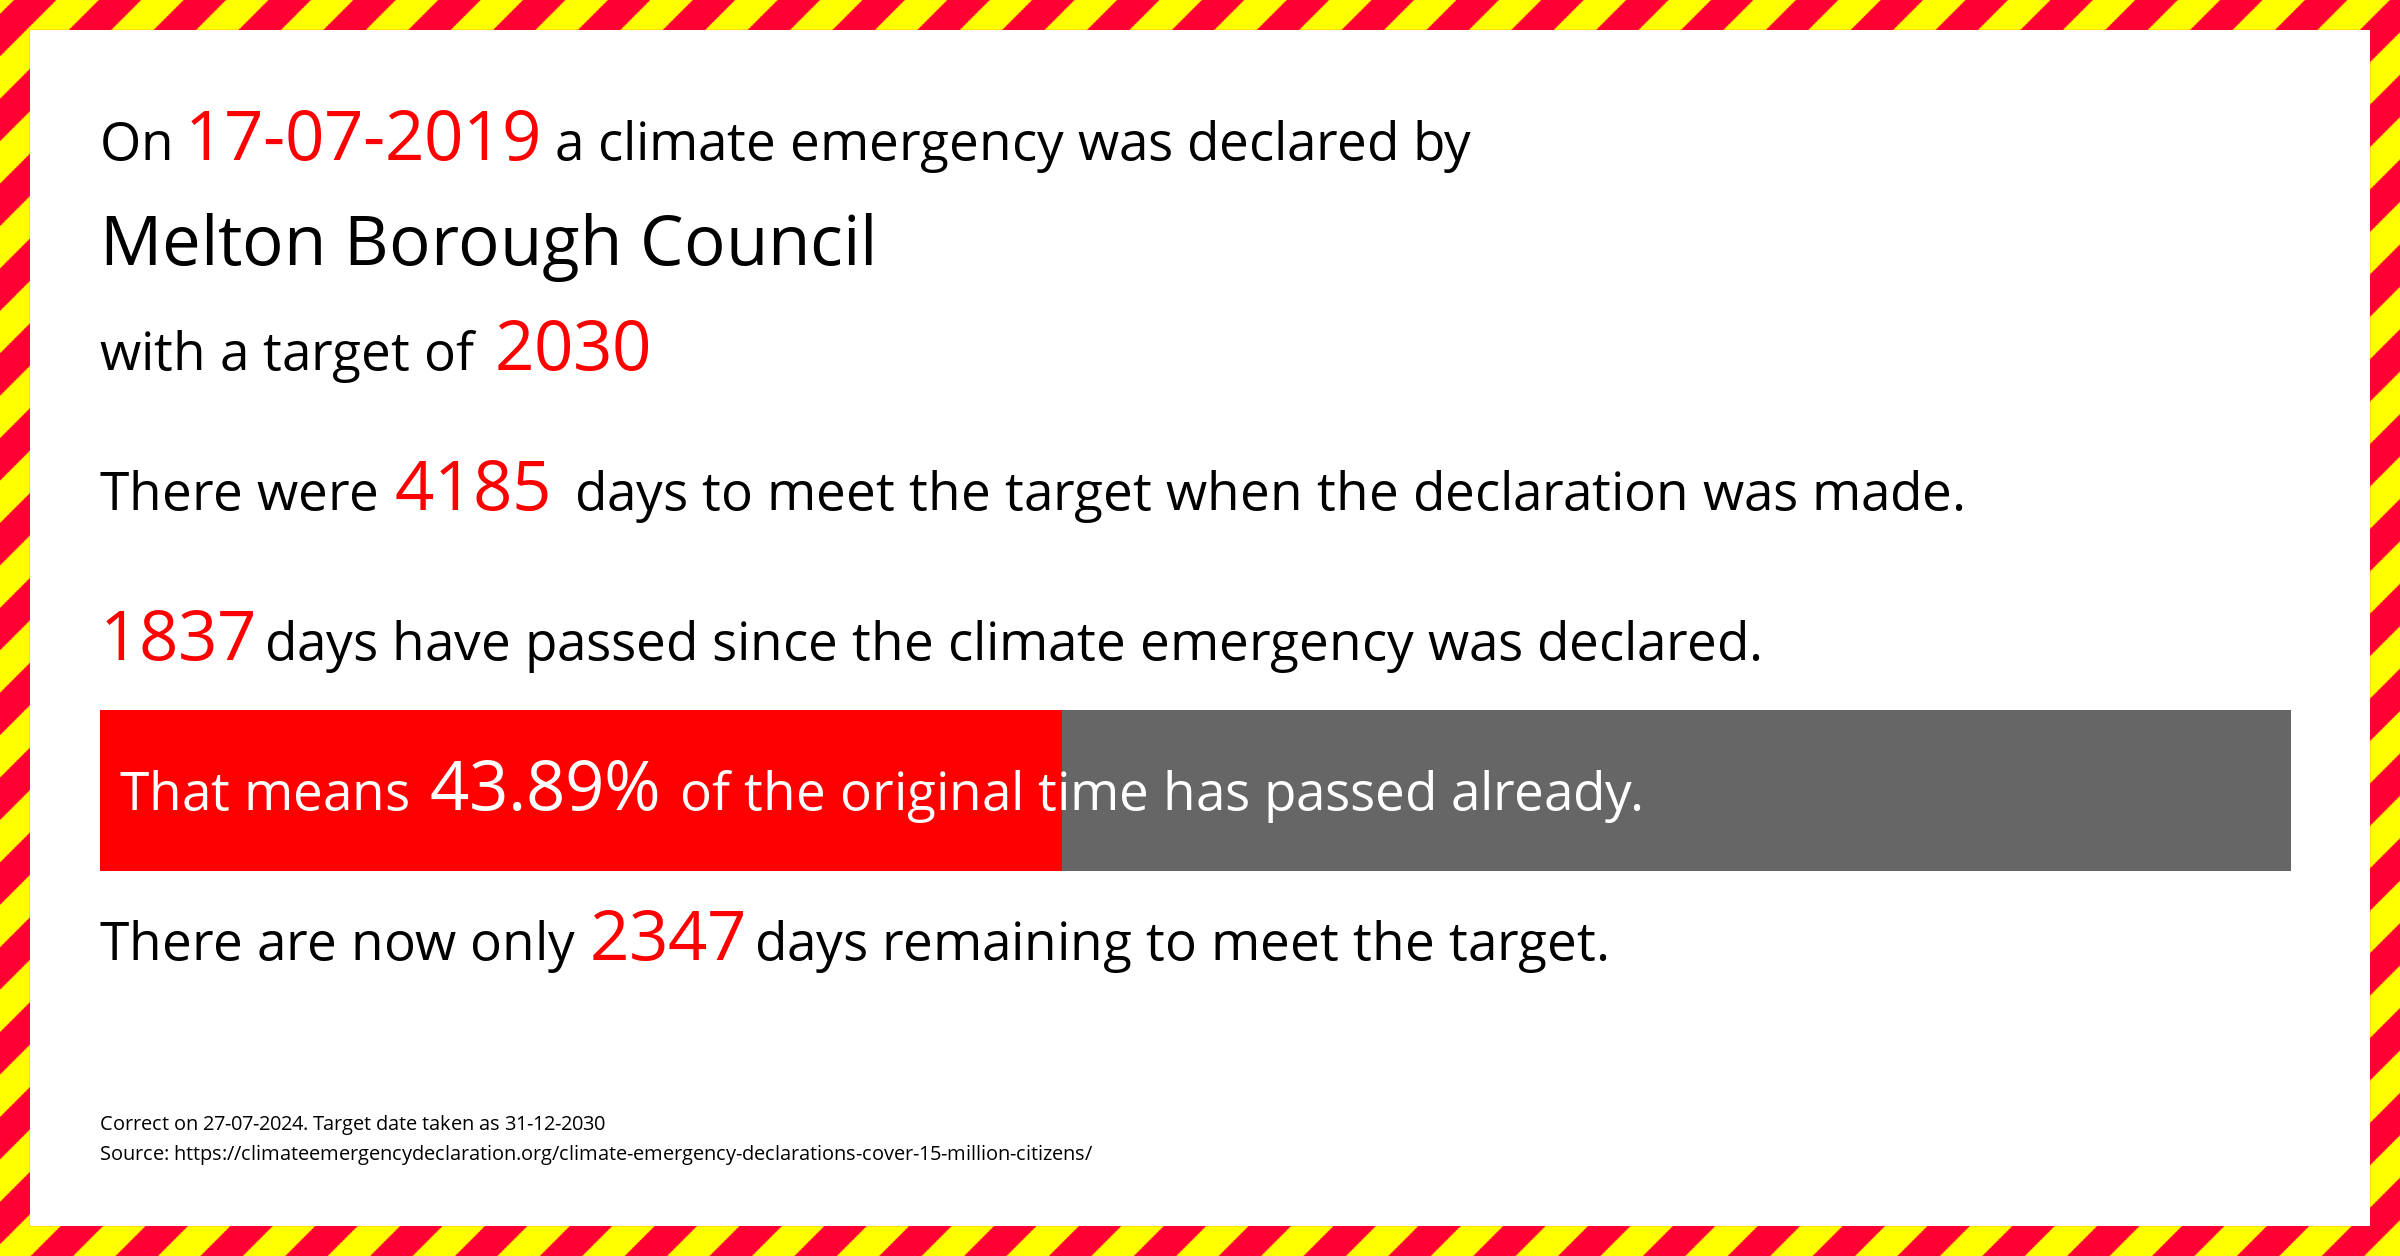 Melton Borough Council declared a Climate emergency on Wednesday 17th July 2019, with a target of 2030.